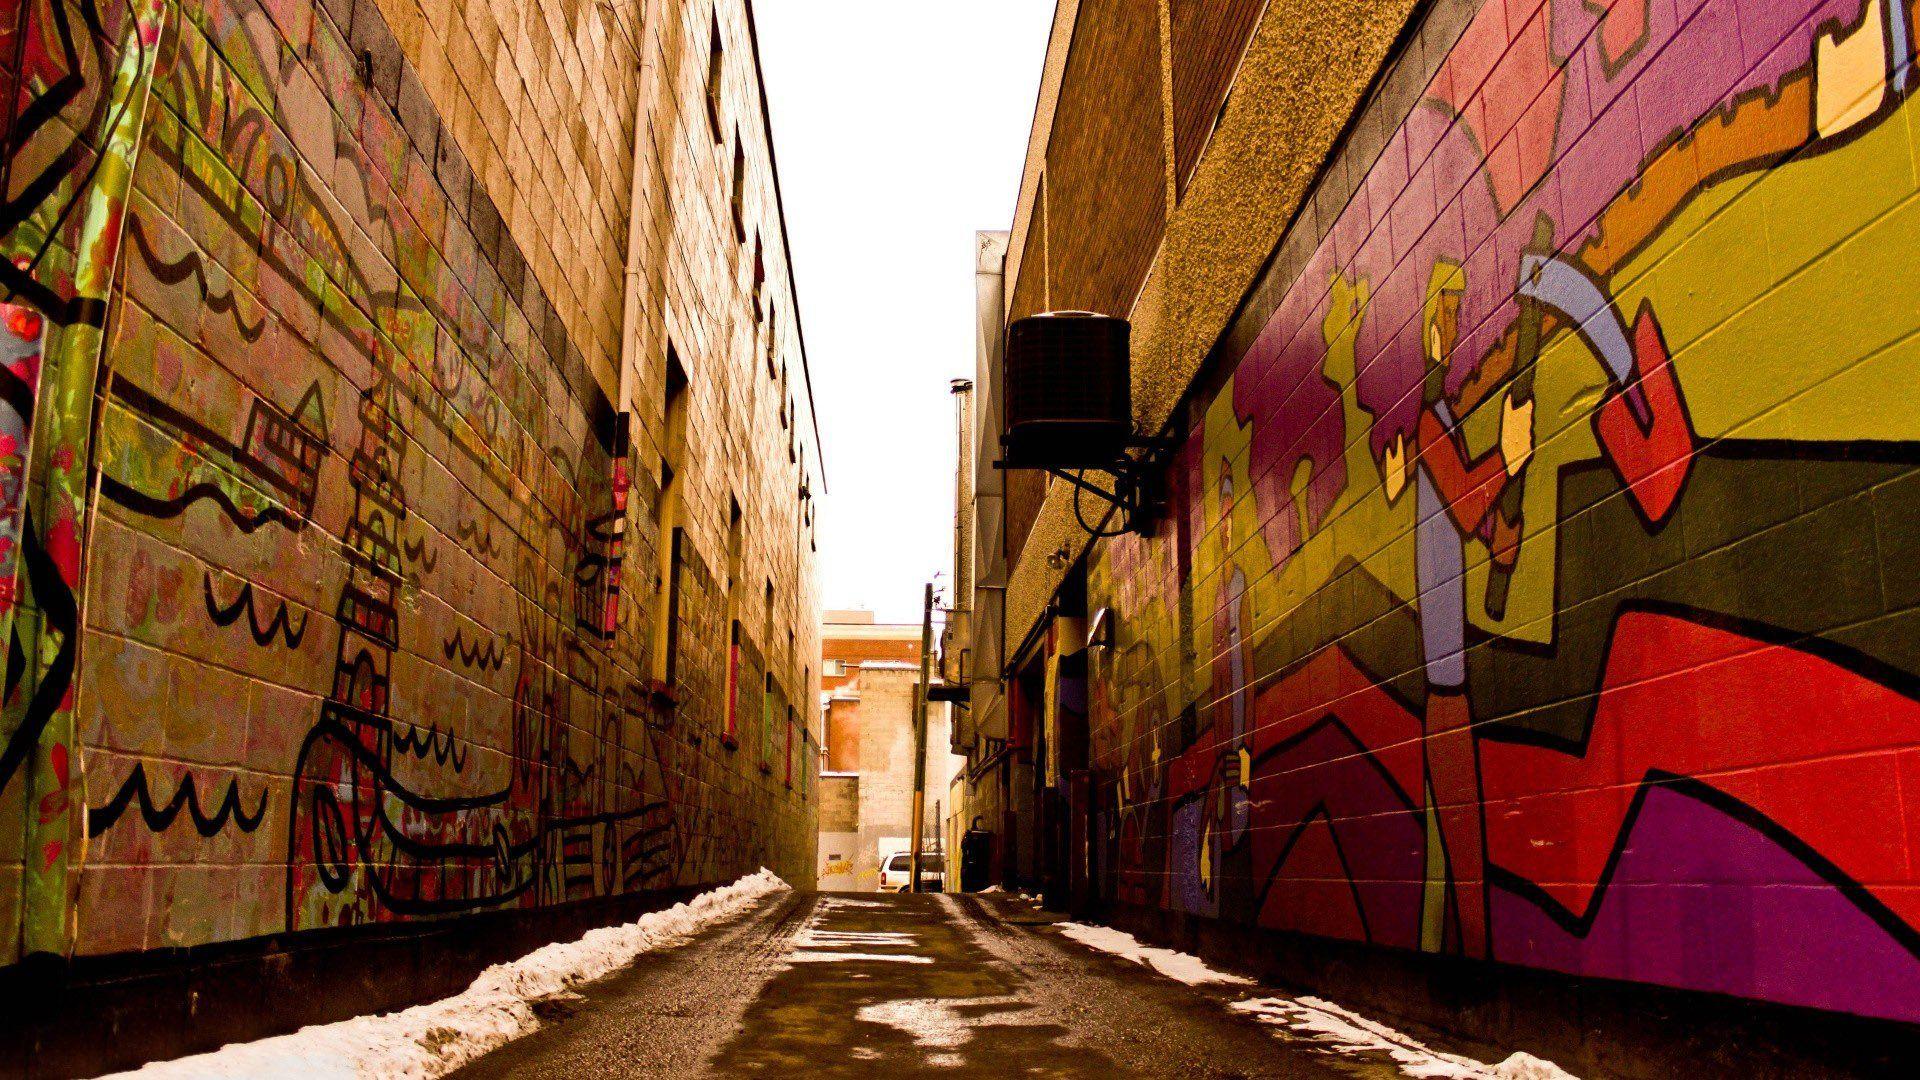 Alley Wall Wallpapers Top Free Alley Wall Backgrounds Wallpaperaccess